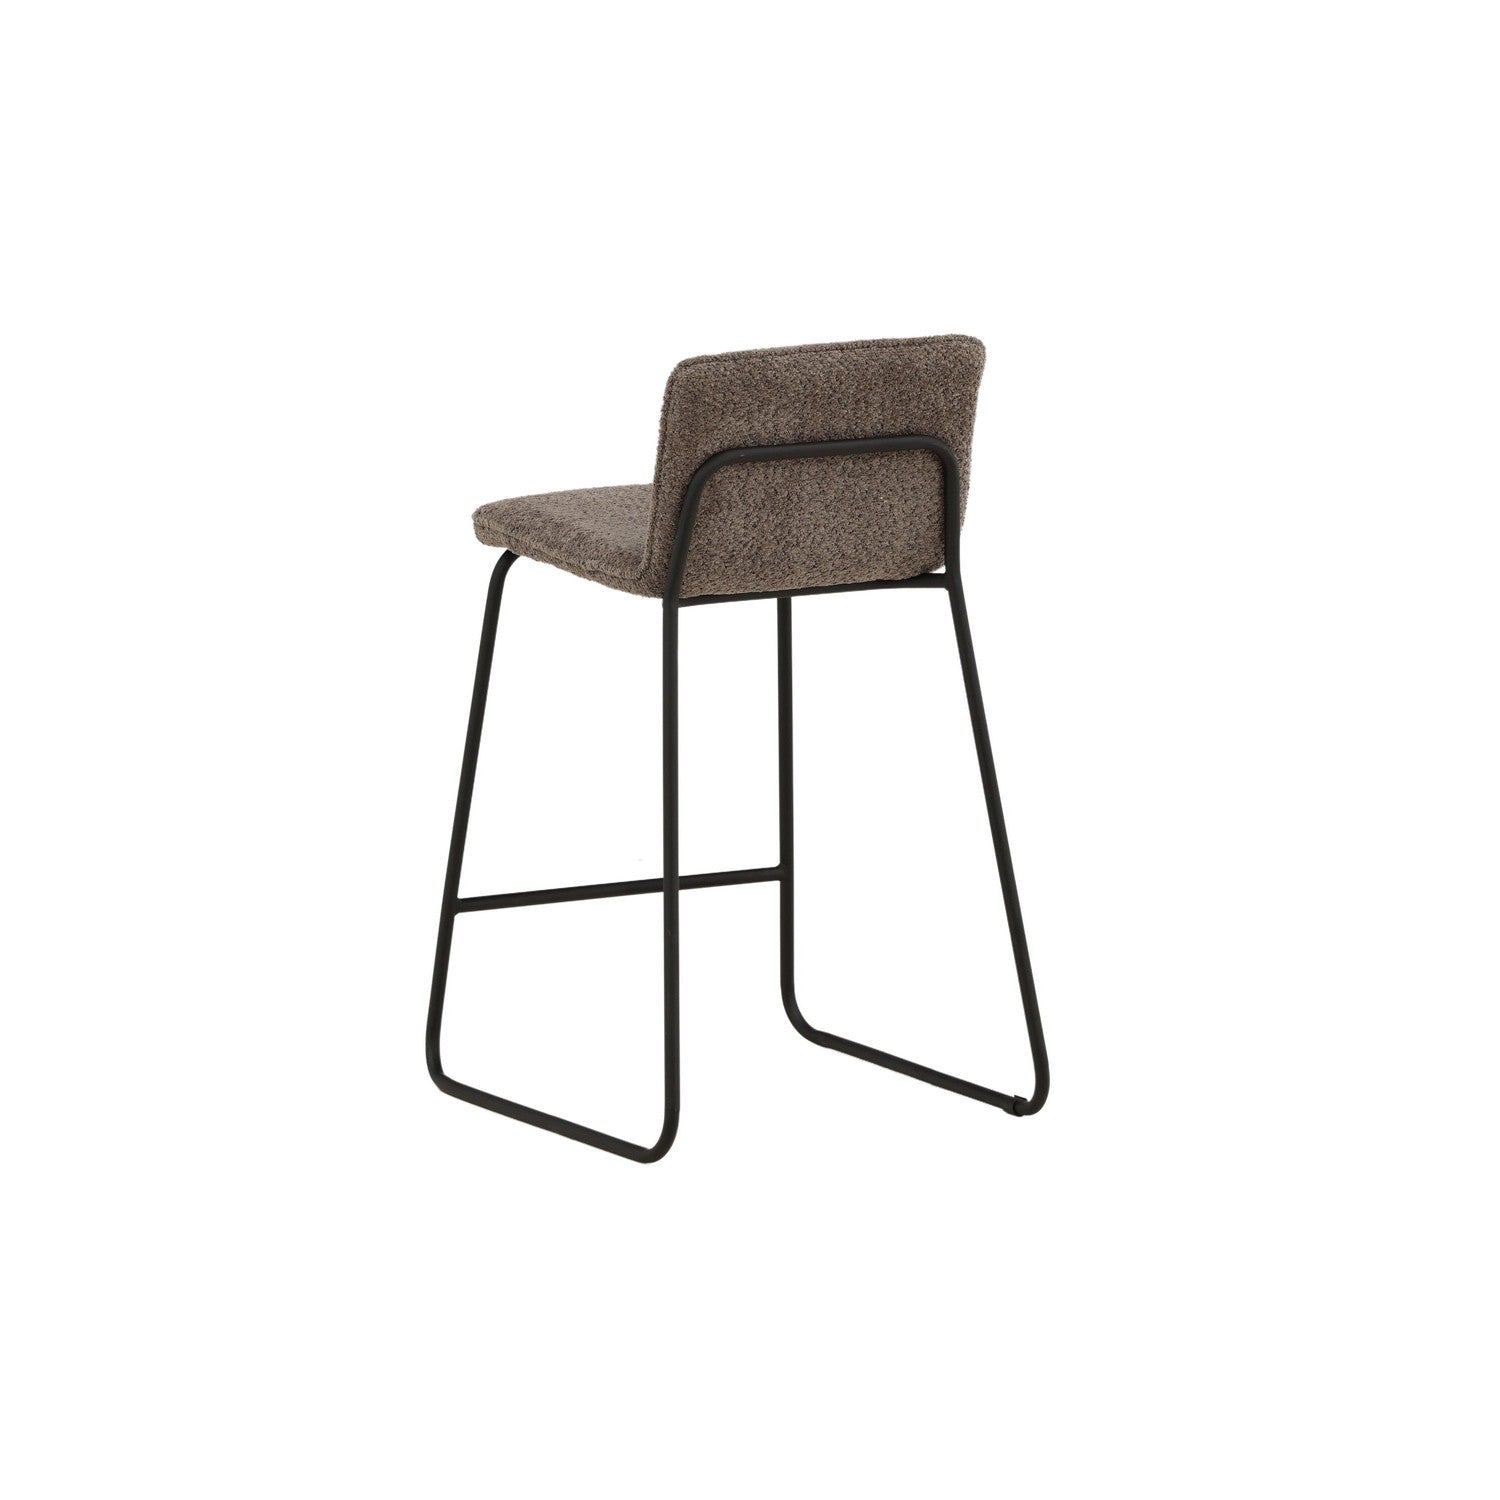 Bisbee Stol-Chair-Venture Home-peaceofhome.se